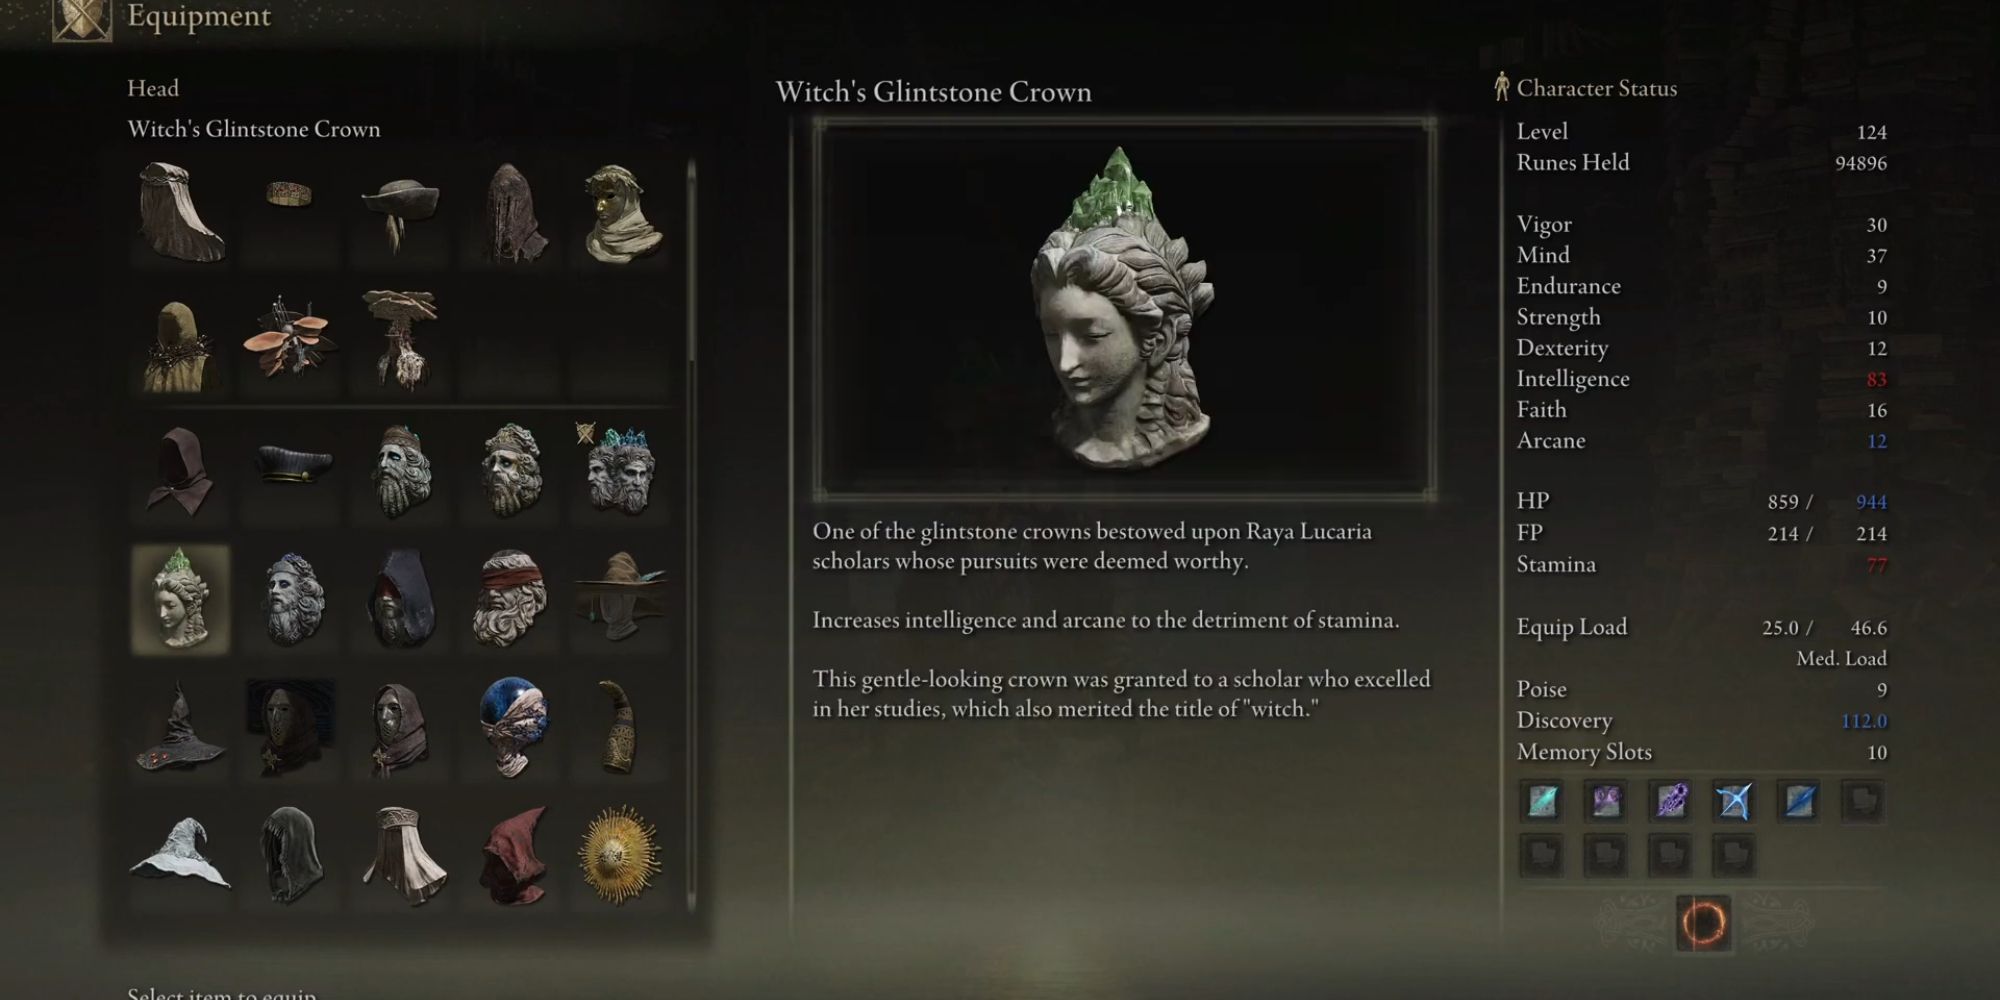 witches glintstone crown in elden ring players inventory